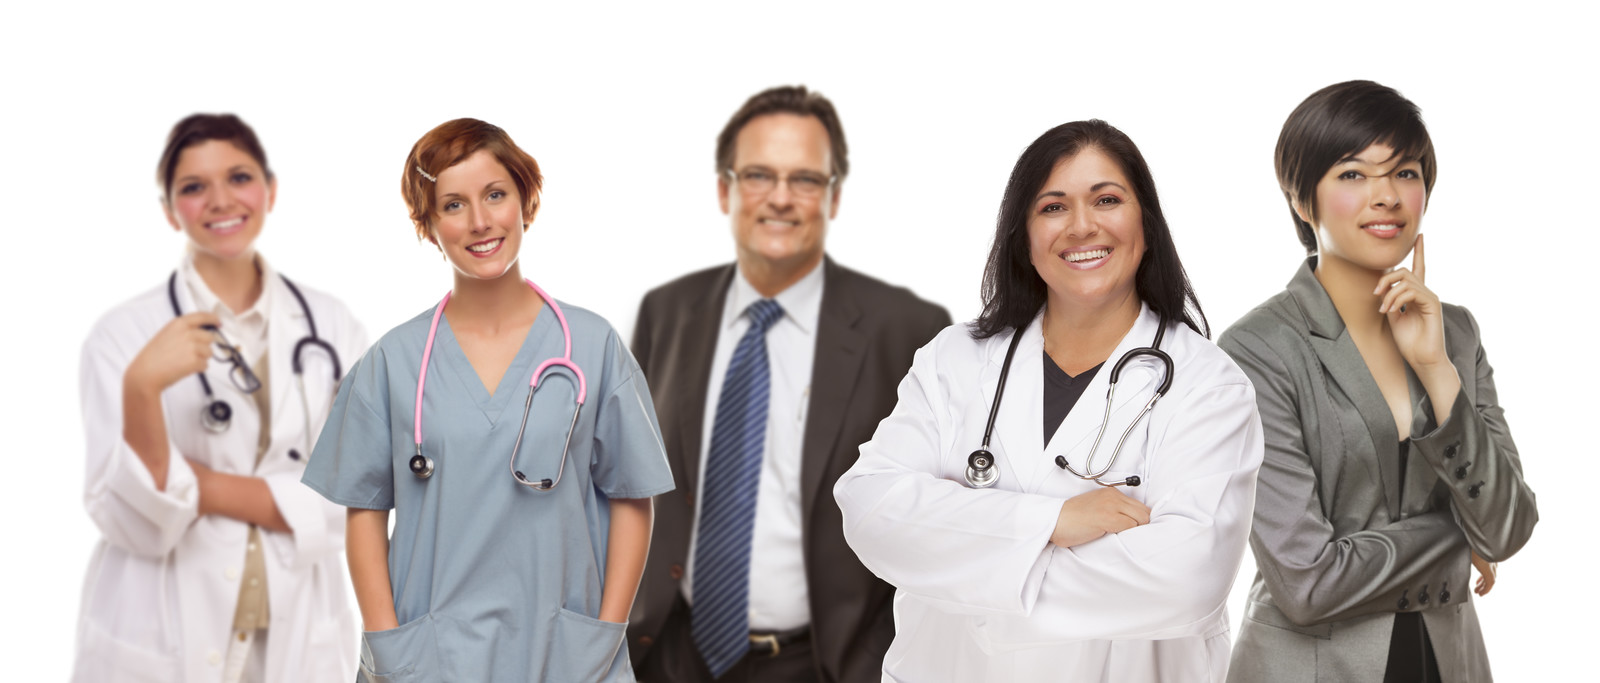 Hiring Medical Practice Support Staff